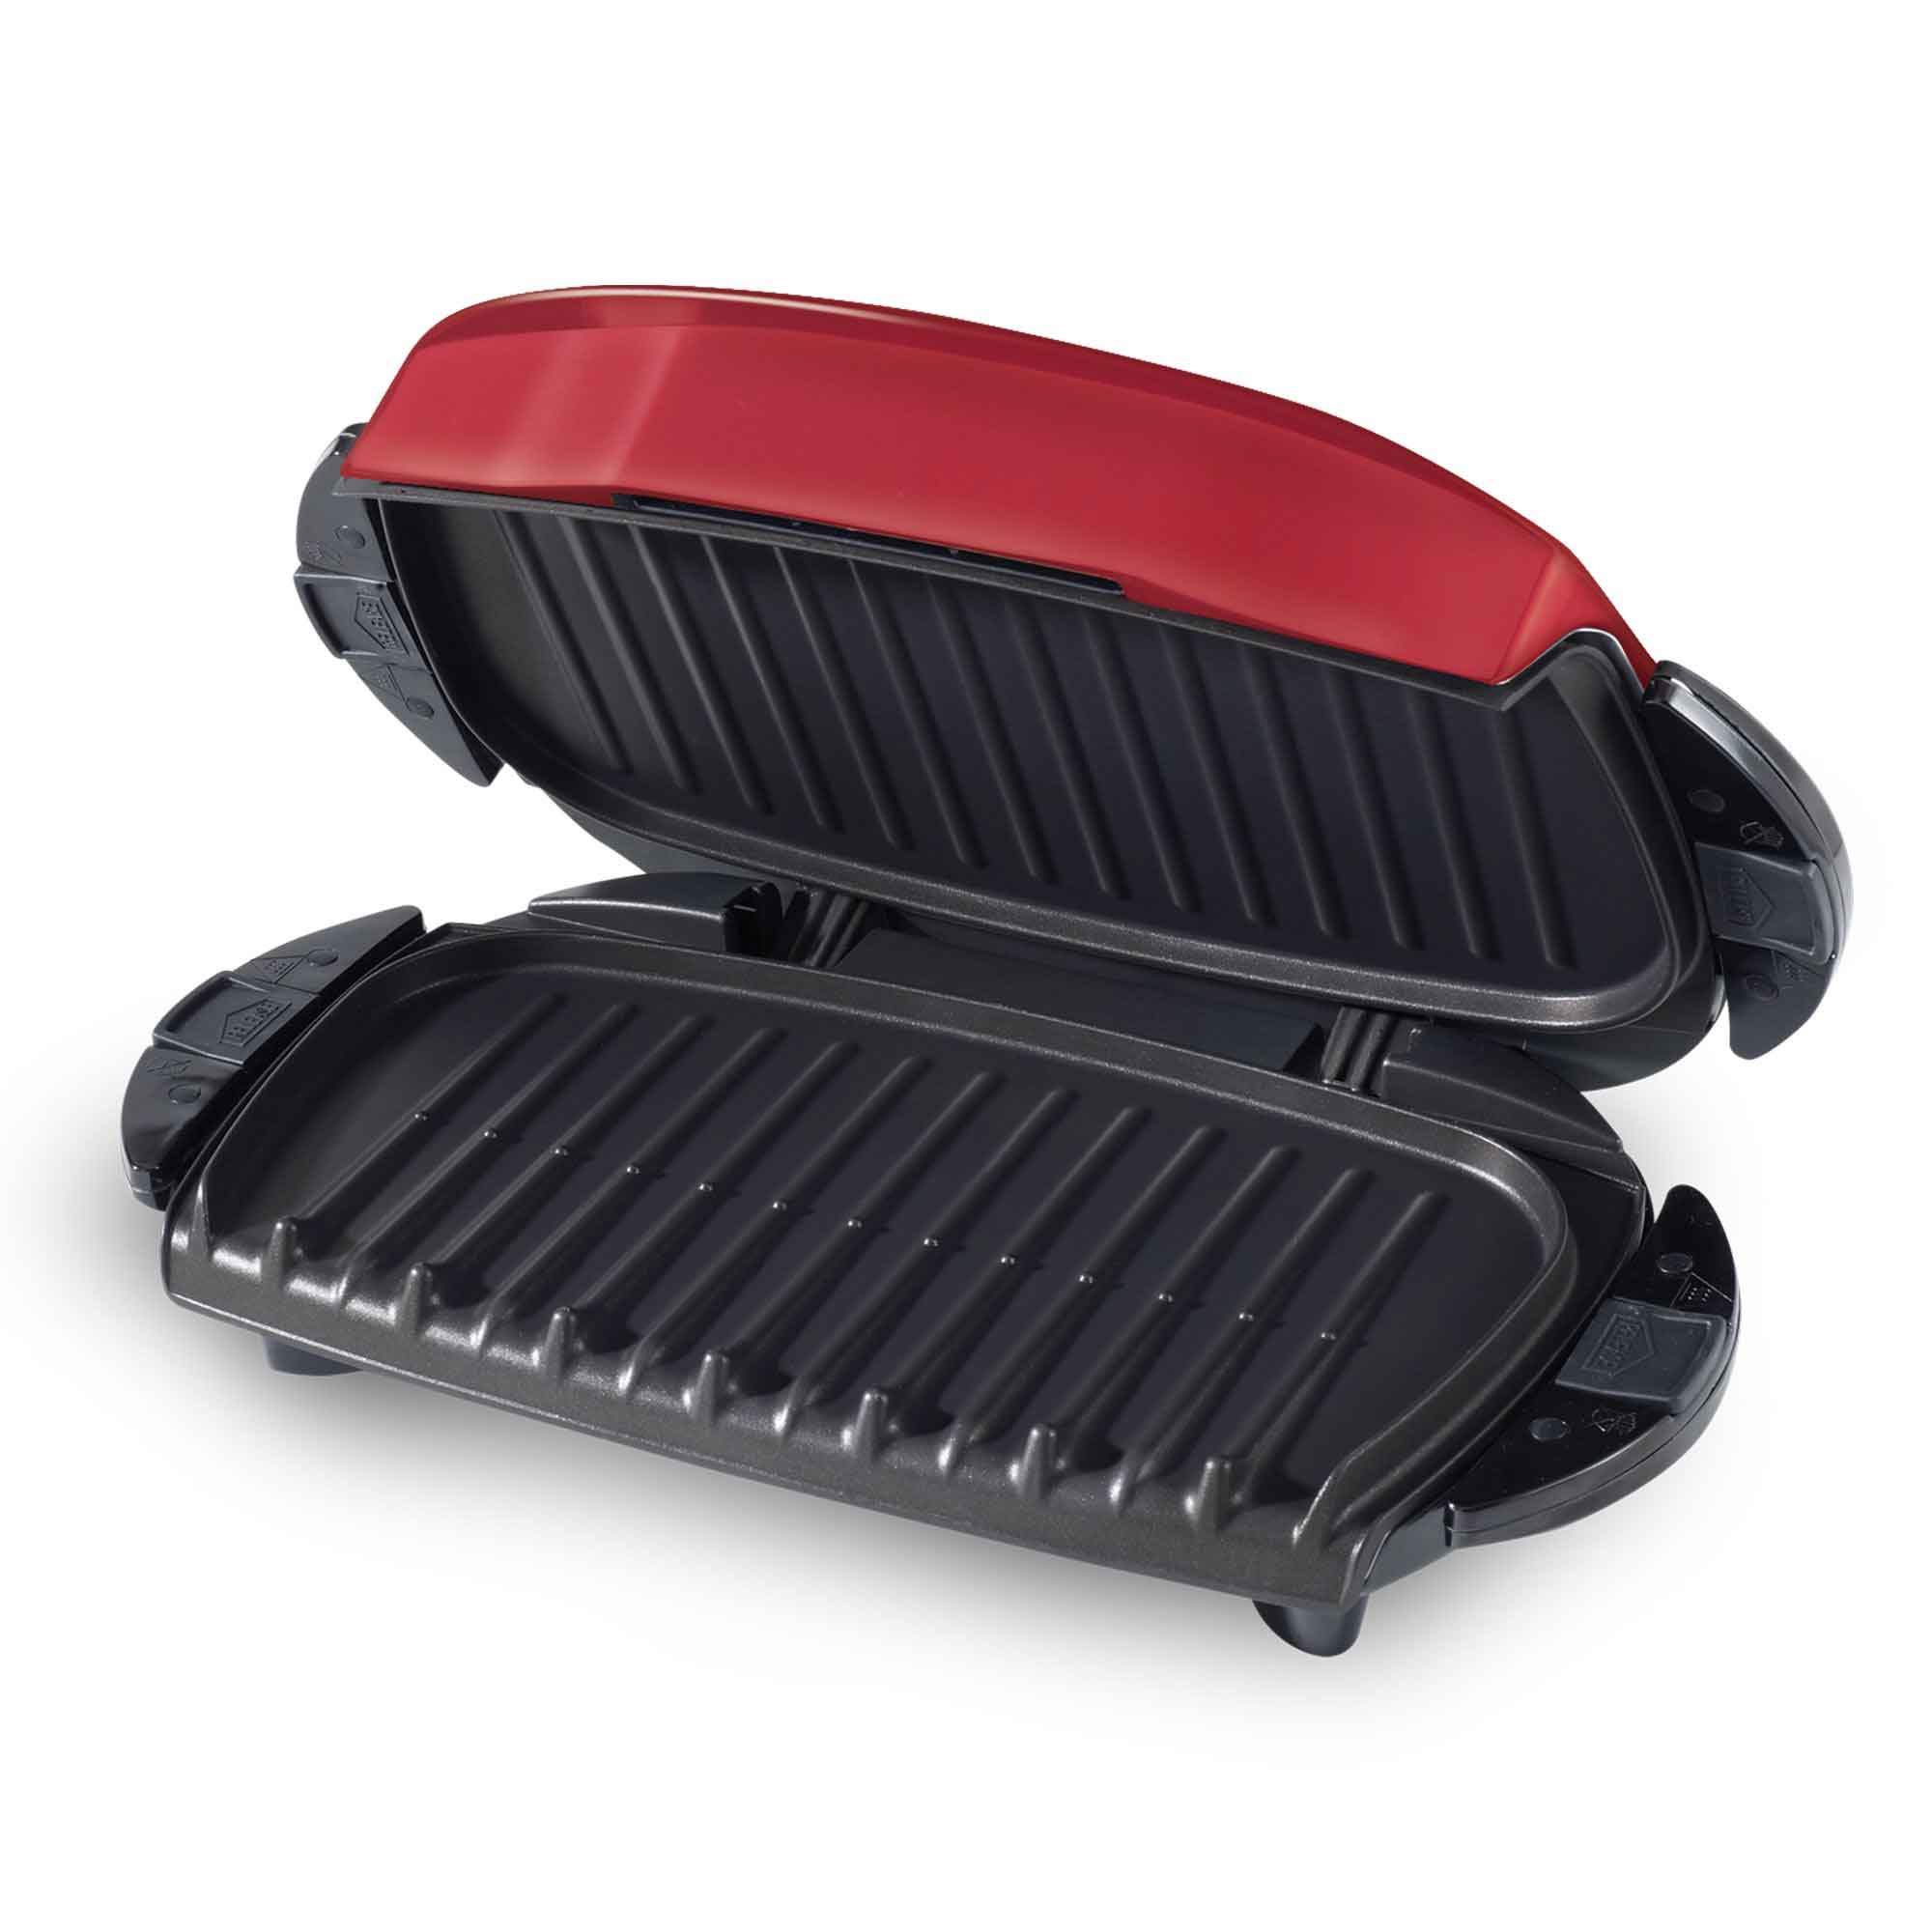 George Foreman 5-Serving Removable Plate Electric Indoor Grill and Panini  Press, Red